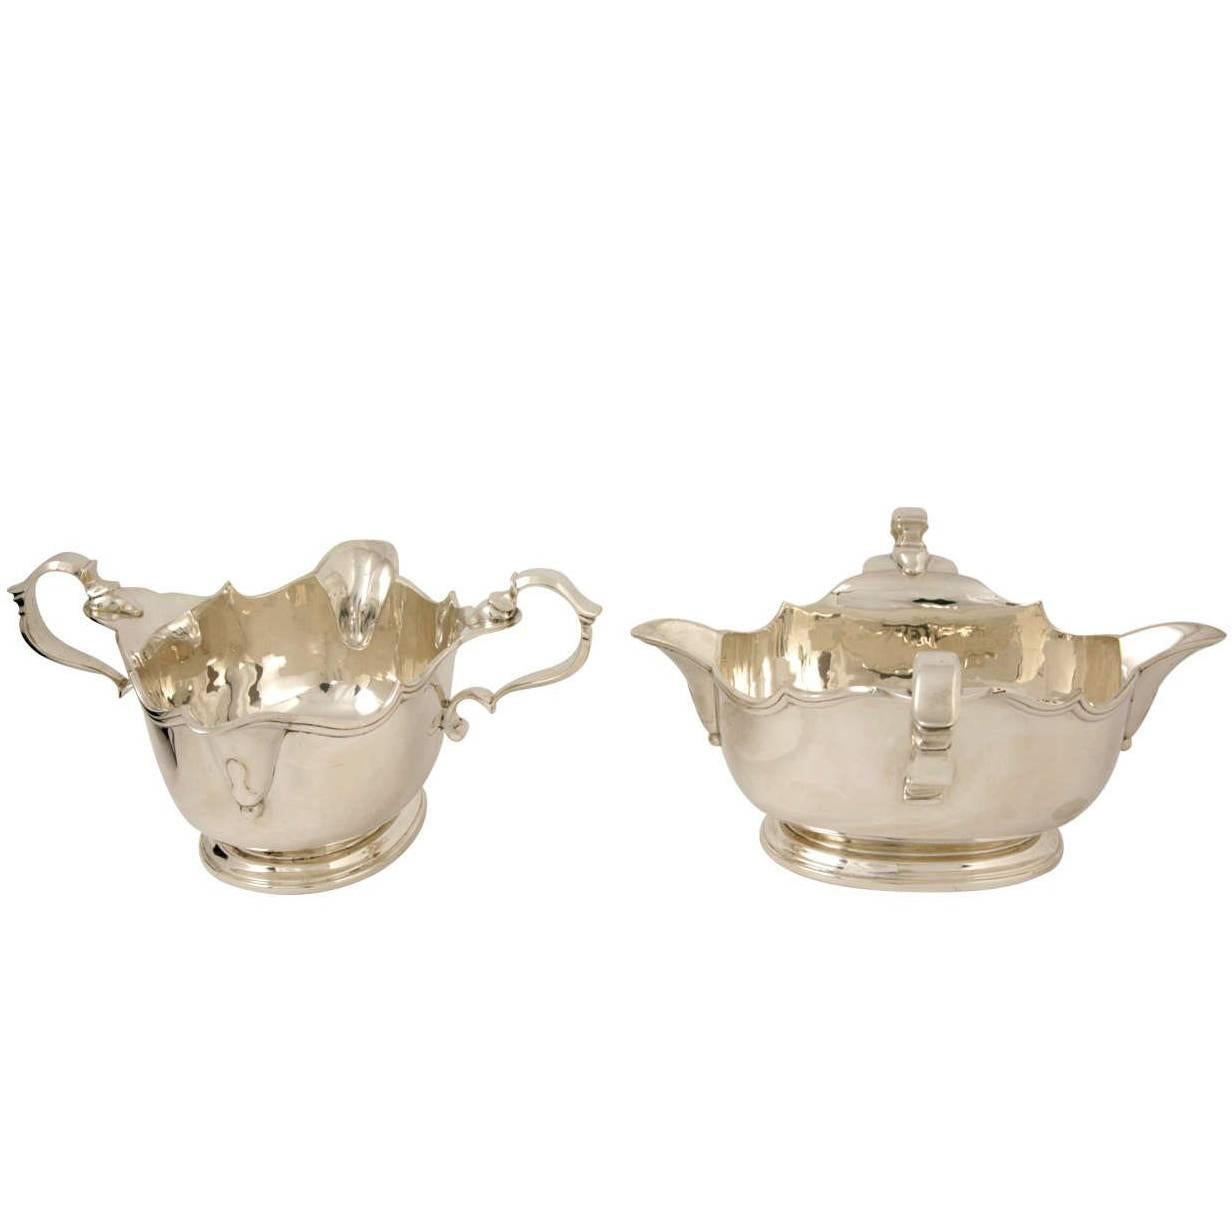 Pair of Large Double-Lipped Sterling Silver Sauceboats